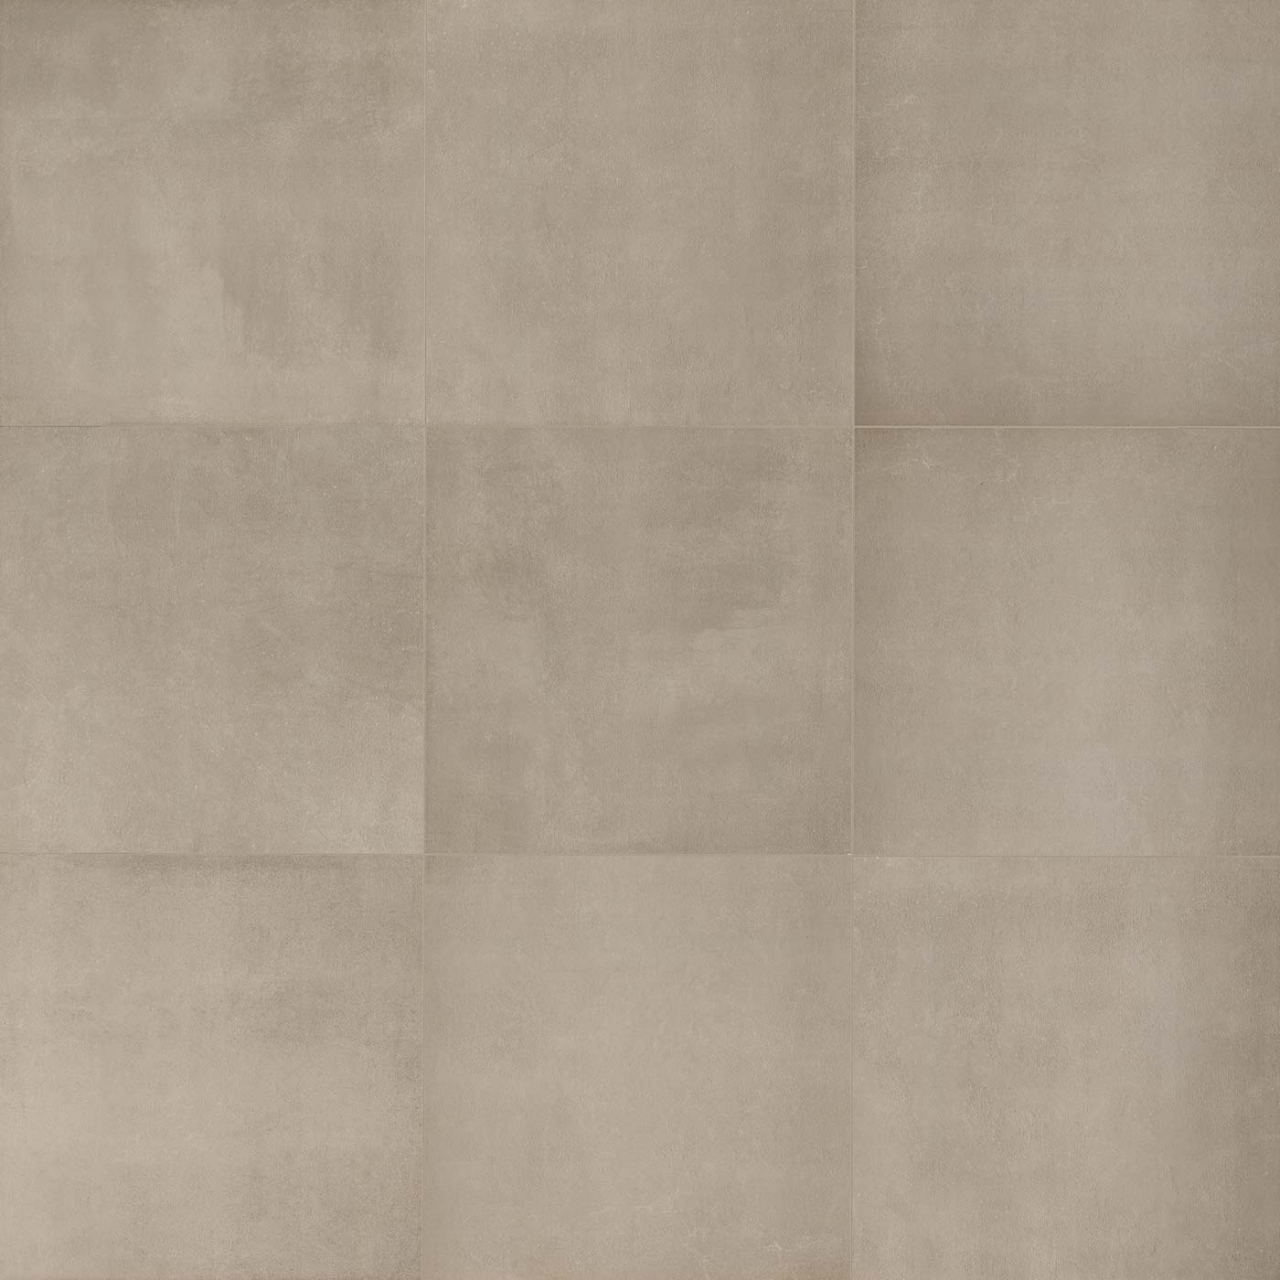 Floorgres Industrial - Taupe 80x80x10 738659